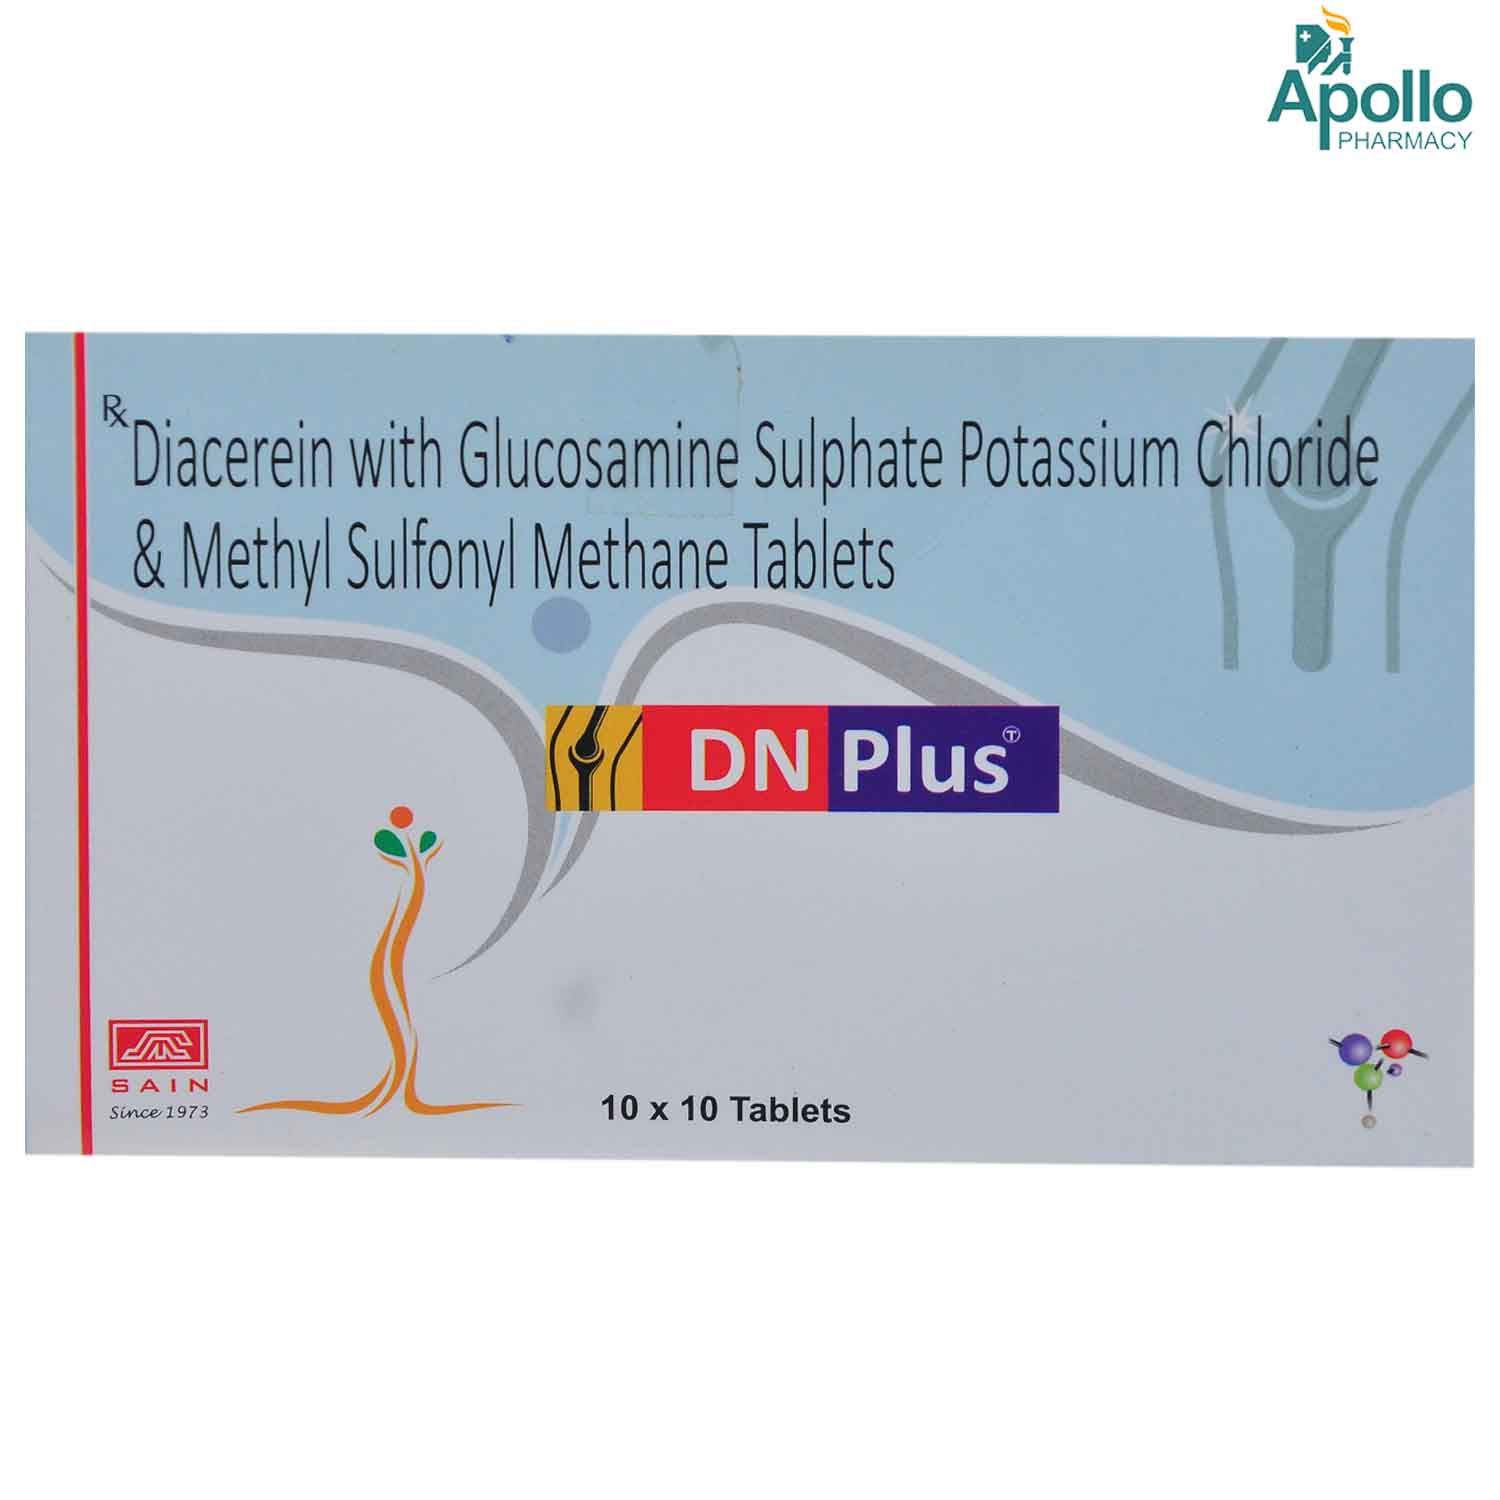 DN PLUS TABLET, Pack of 10 TABLETS